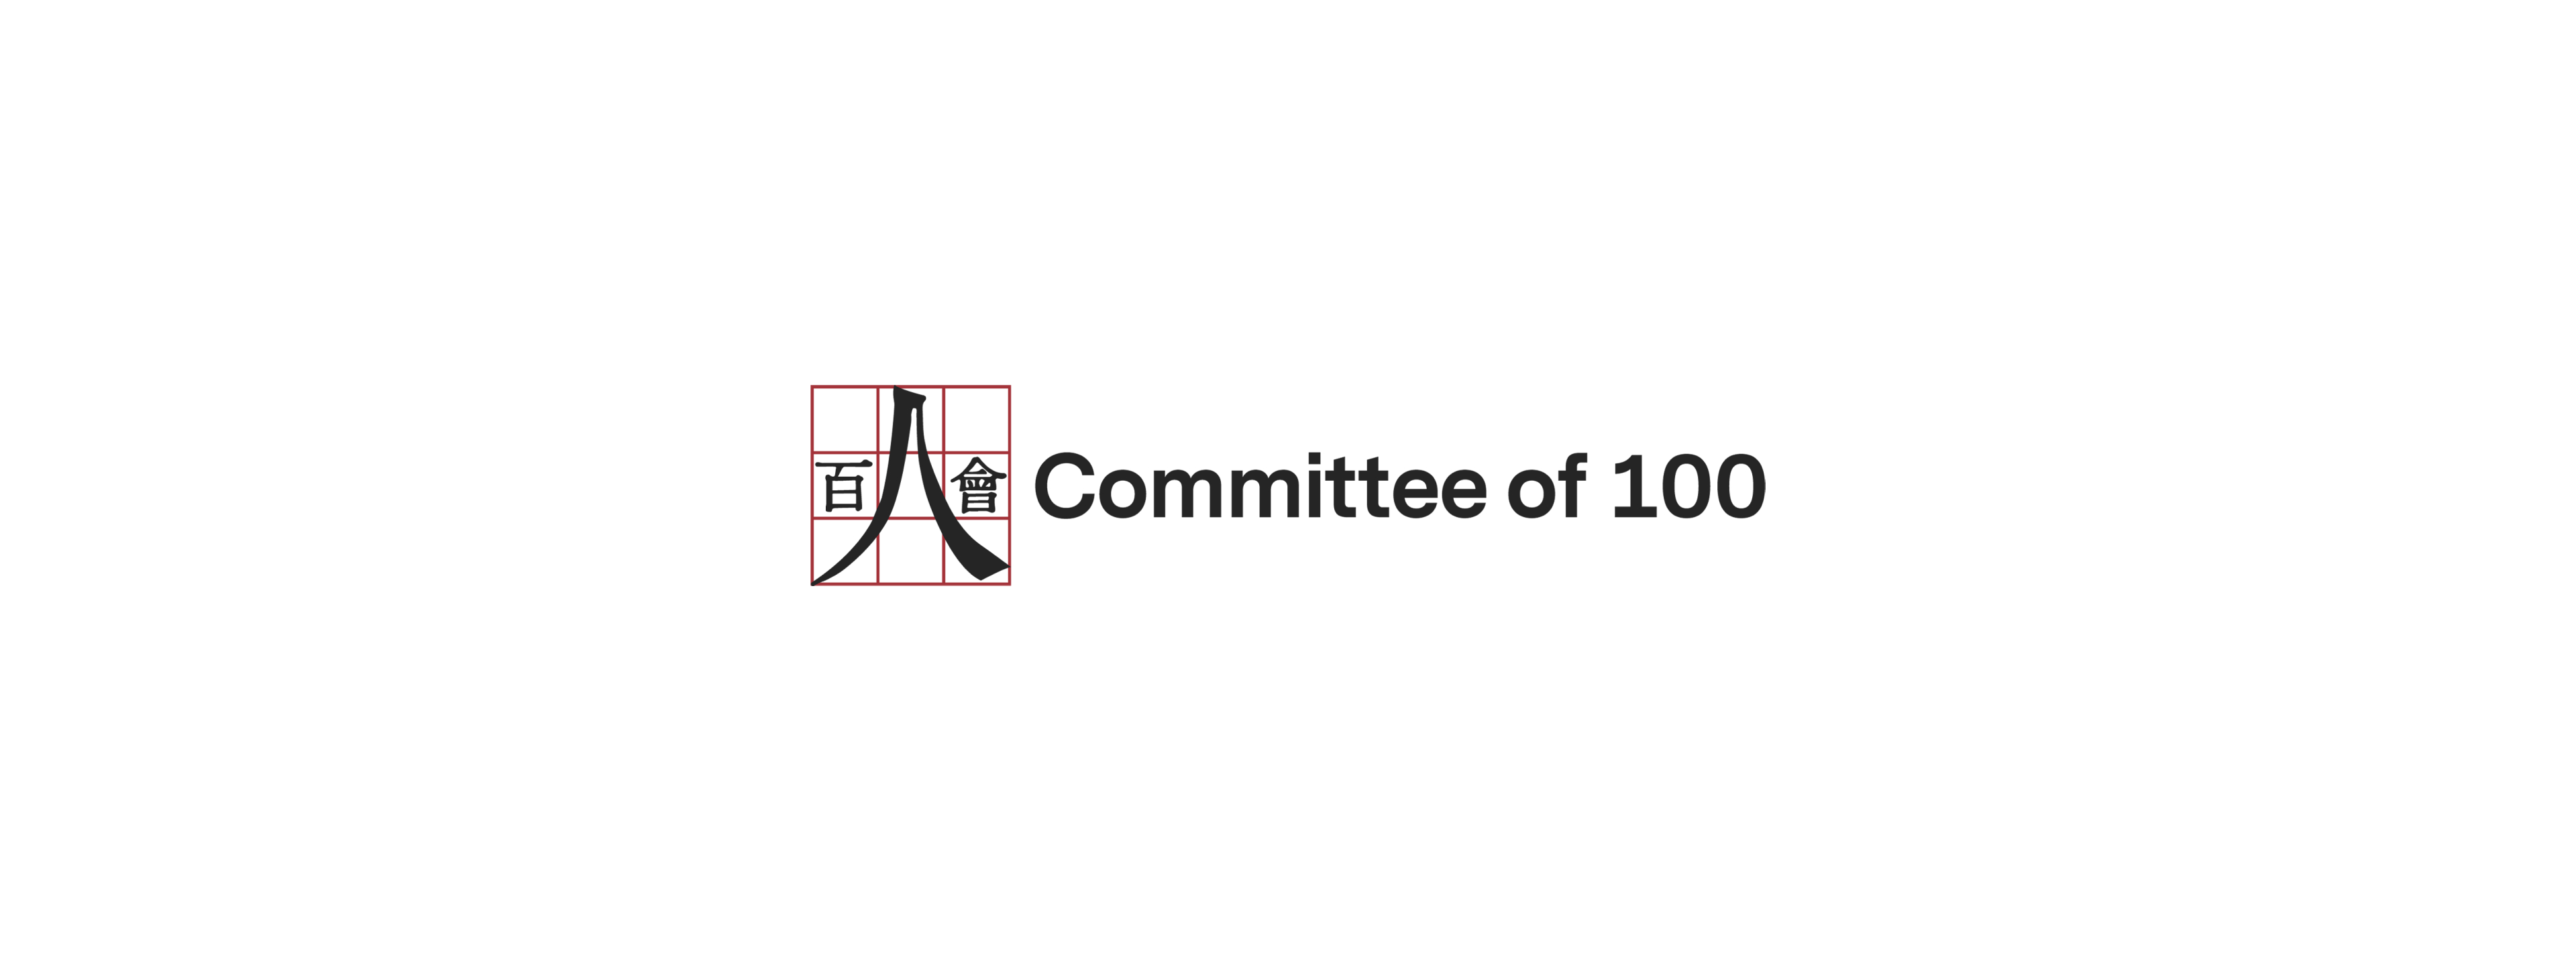 Leading Chinese American Organization Committee of 100 to Discuss Asian Americans in Philanthropy